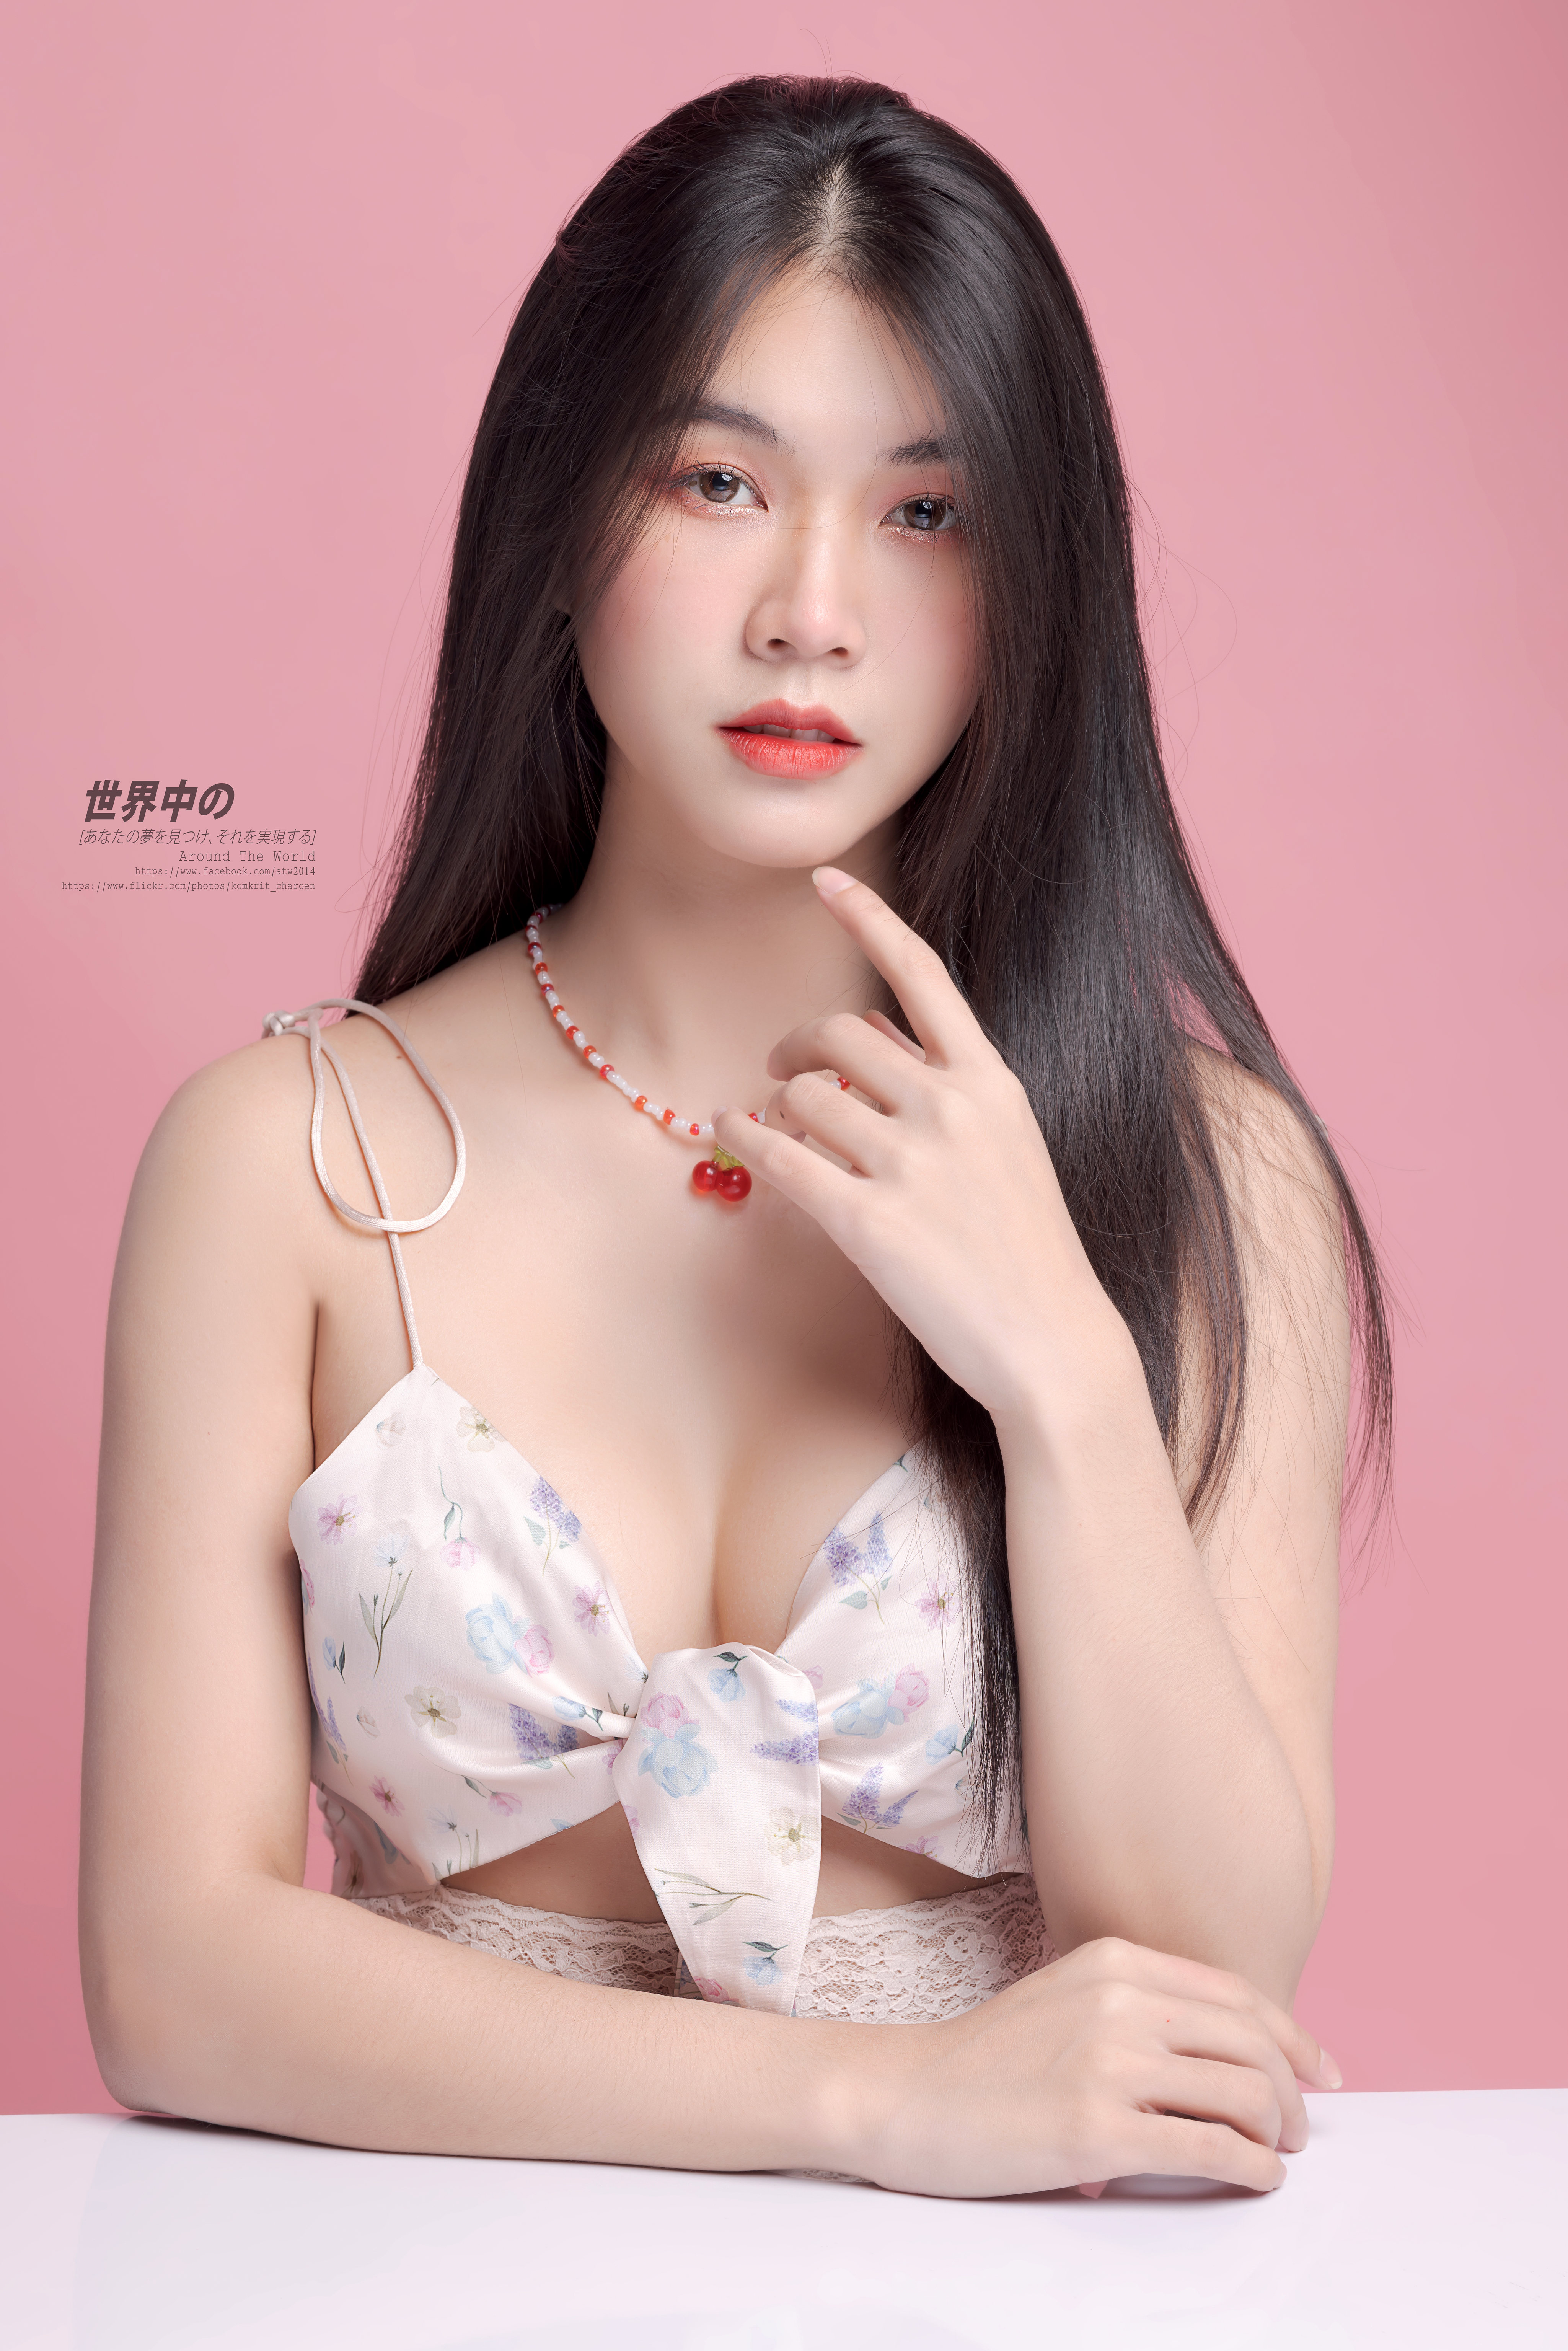 People 4098x6144 Komkrit Charoen women Asian makeup pink parted lips sensual gaze straight hair long hair studio simple background indoors women indoors pink background necklace frontal view Japanese